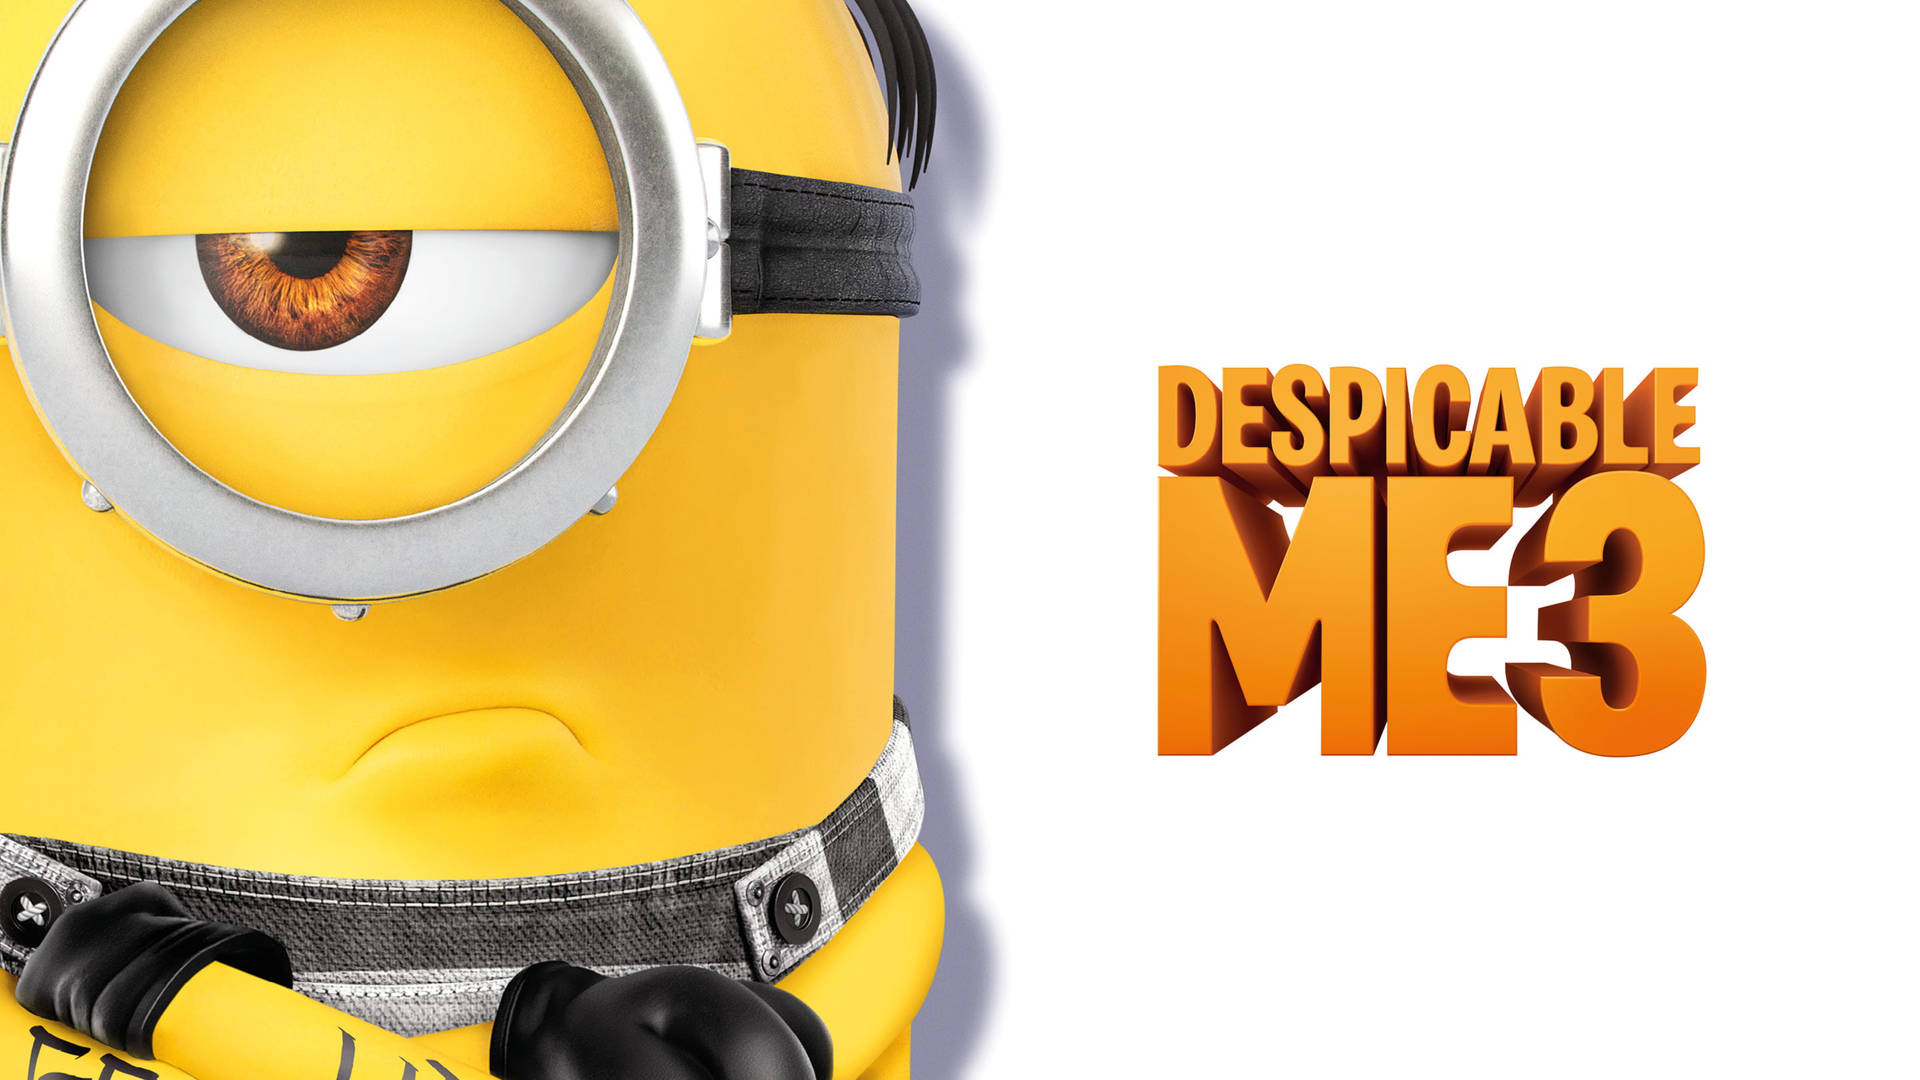 Despicable Me 3 Movie Poster wallpaper.